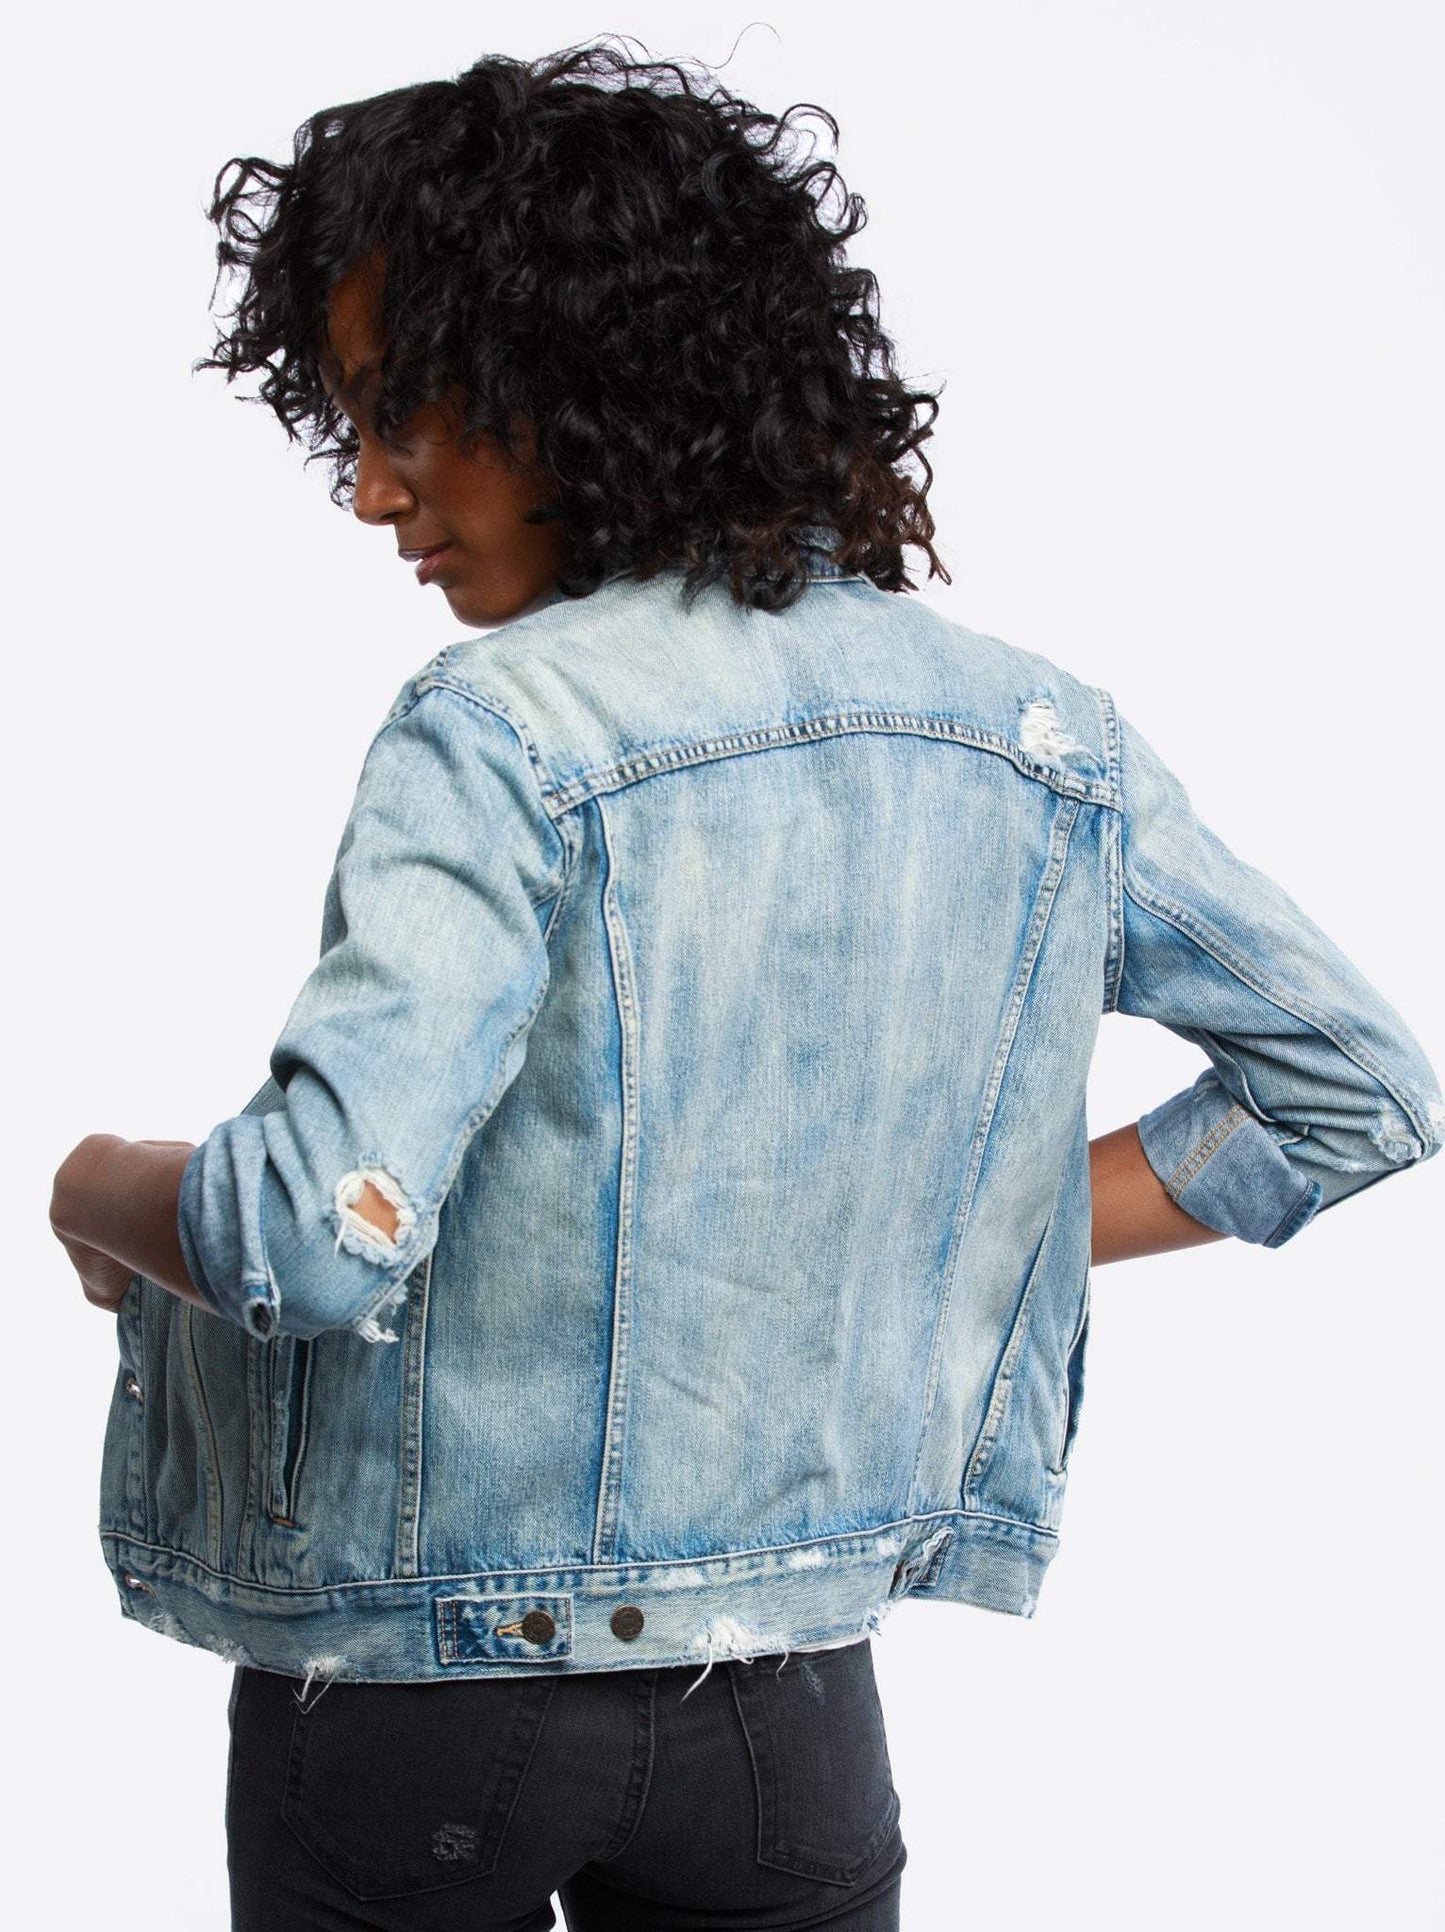 Able Merly Jean Jacket Outerwear in  at Wrapsody